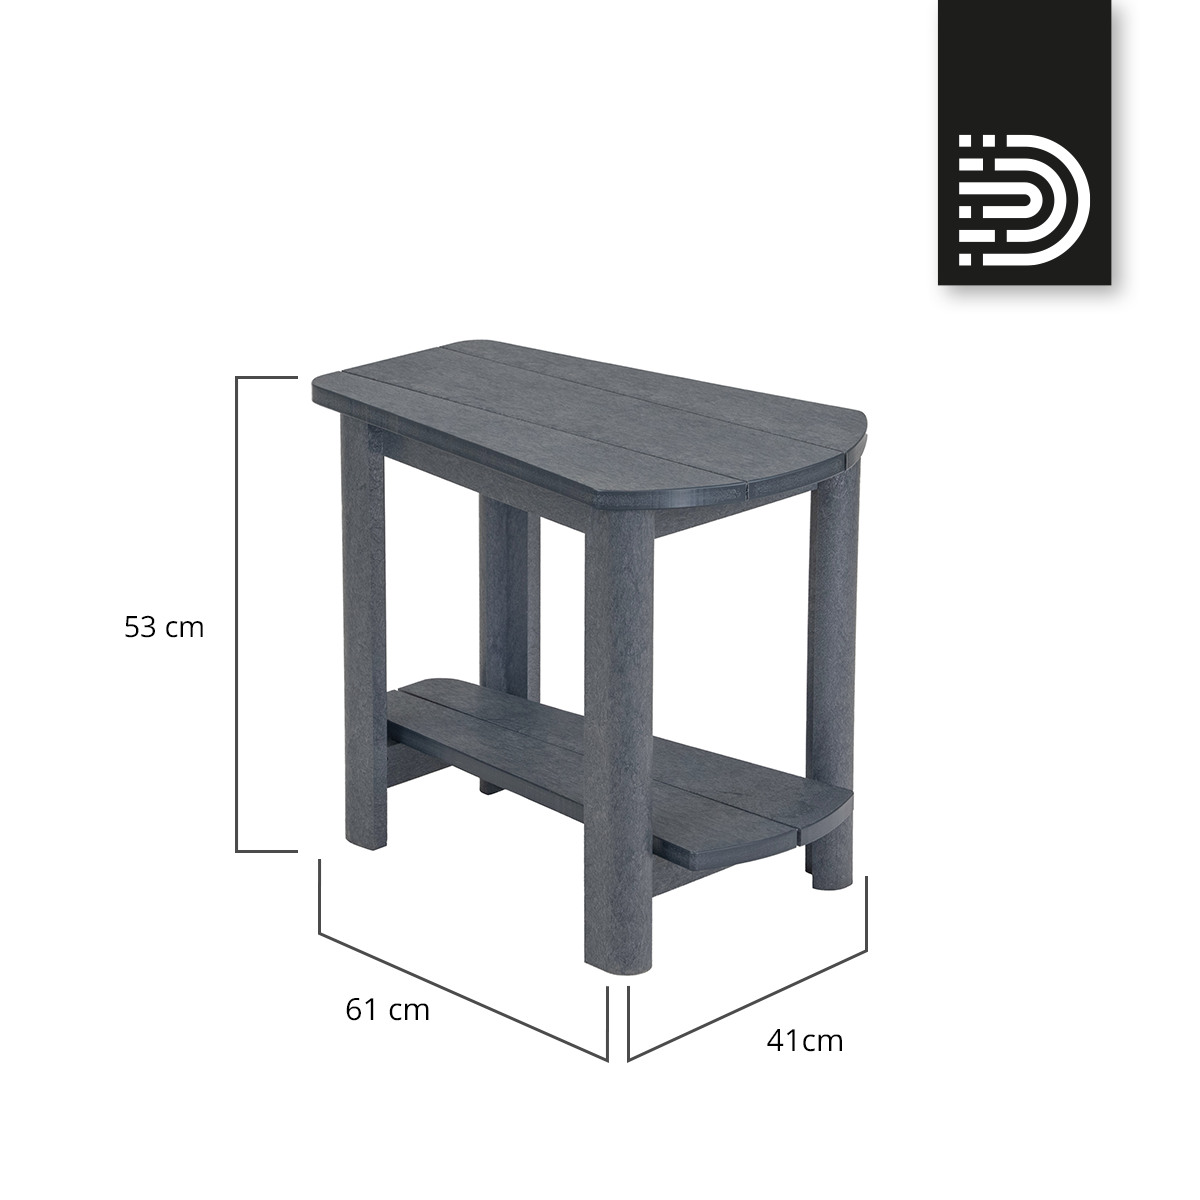 T04 Addy Side Table - blue 03